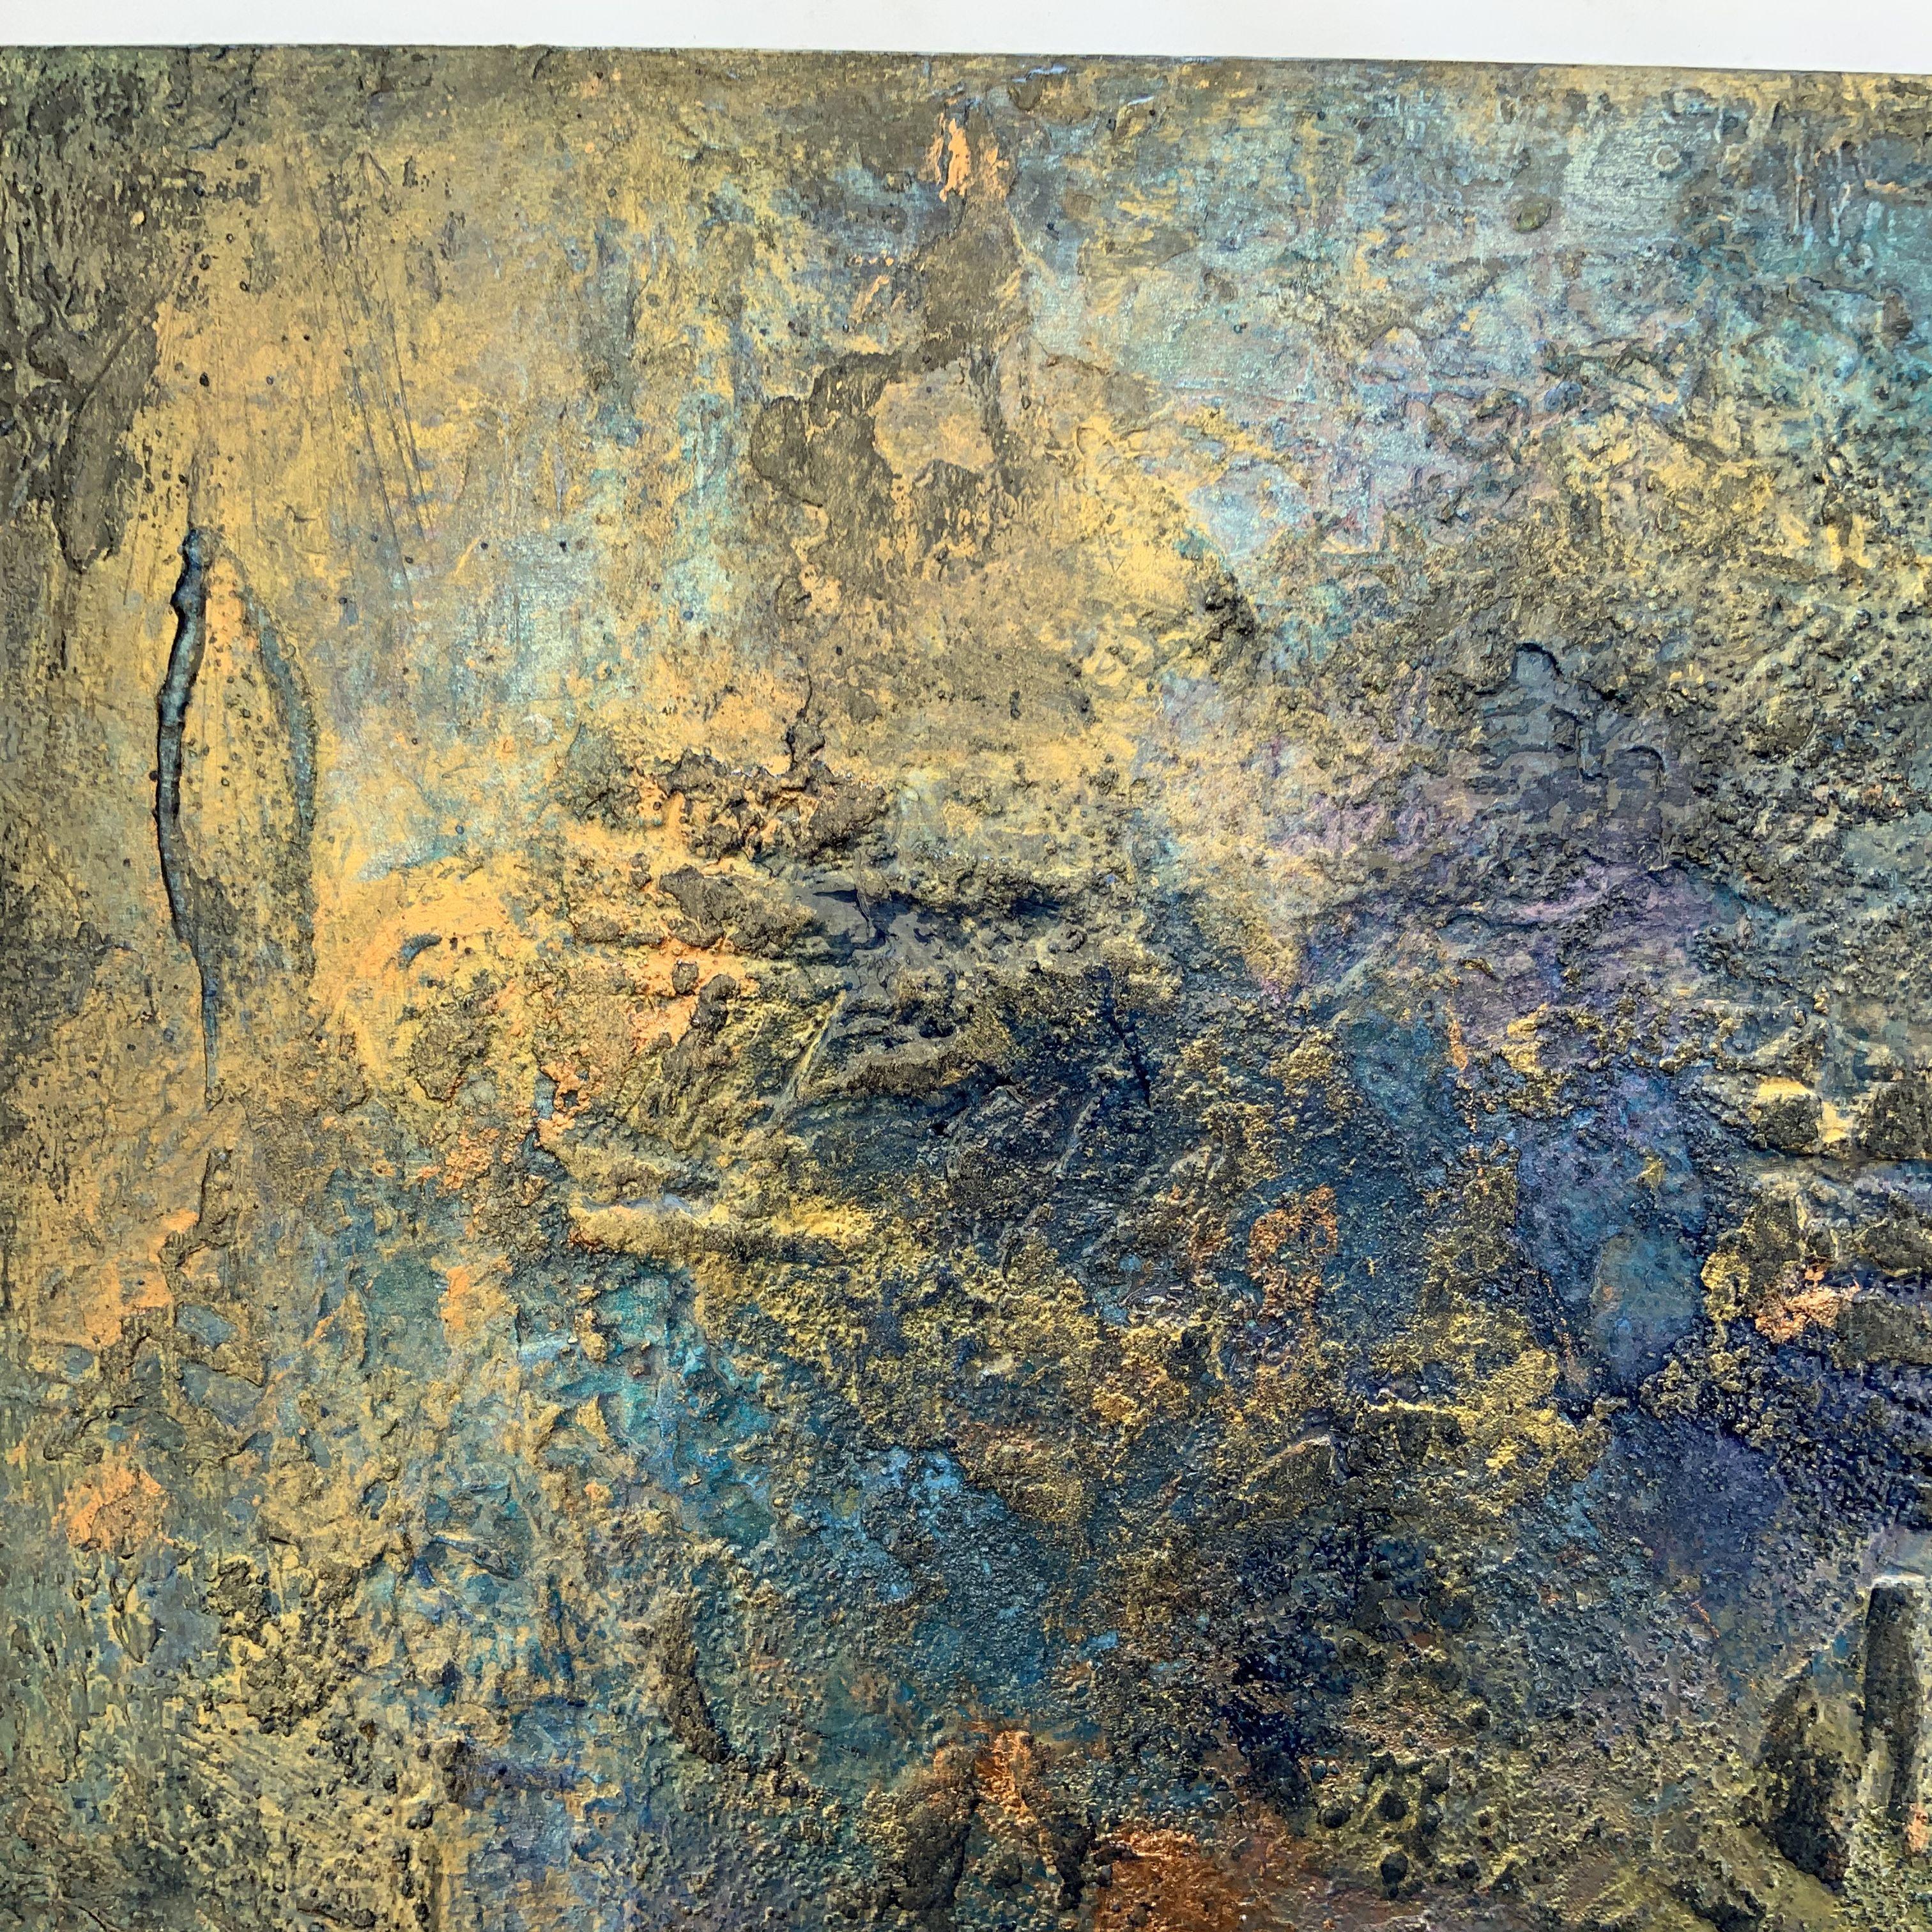 Blues Metallic Diptych, Mixed Media on Wood Panel - Abstract Expressionist Mixed Media Art by Janice  Rogers